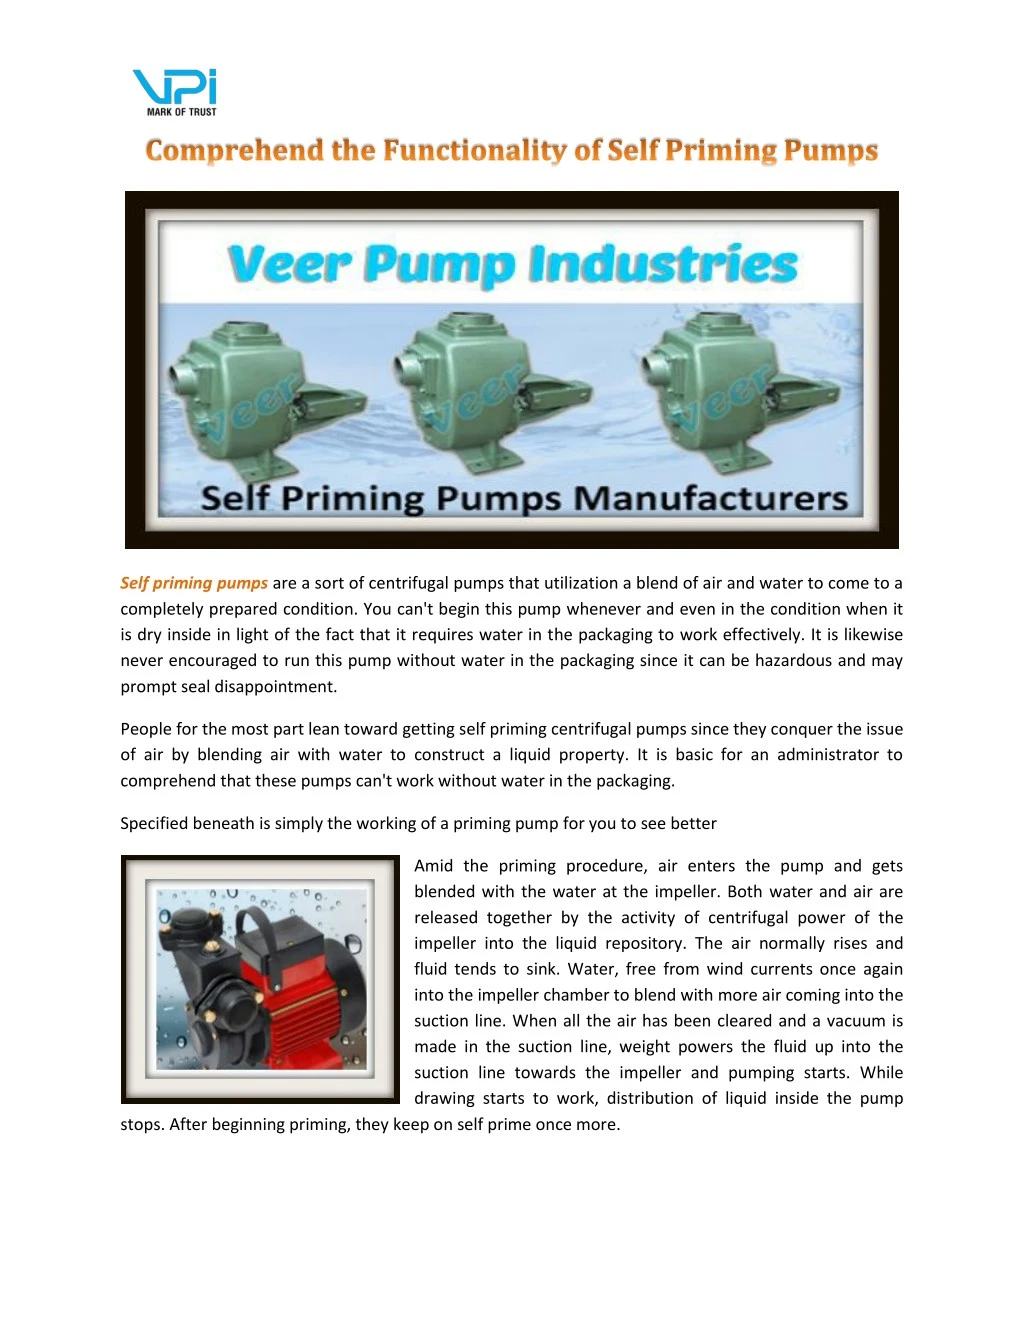 are a sort of centrifugal pumps that utilization